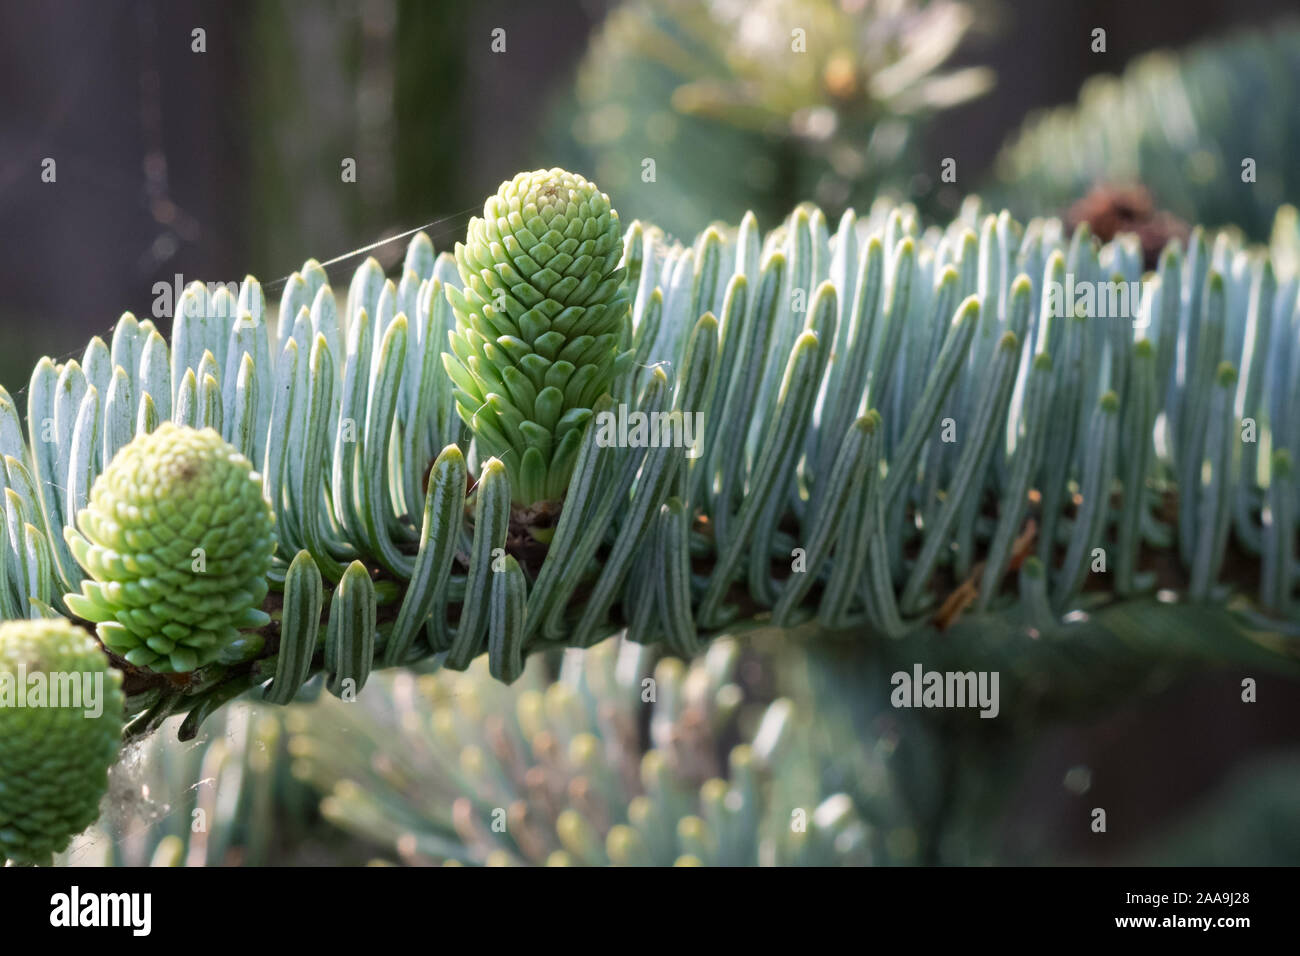 Details of young developing shoots of Noble fir (Abies procera glauca) in a backyard garden. Stock Photo